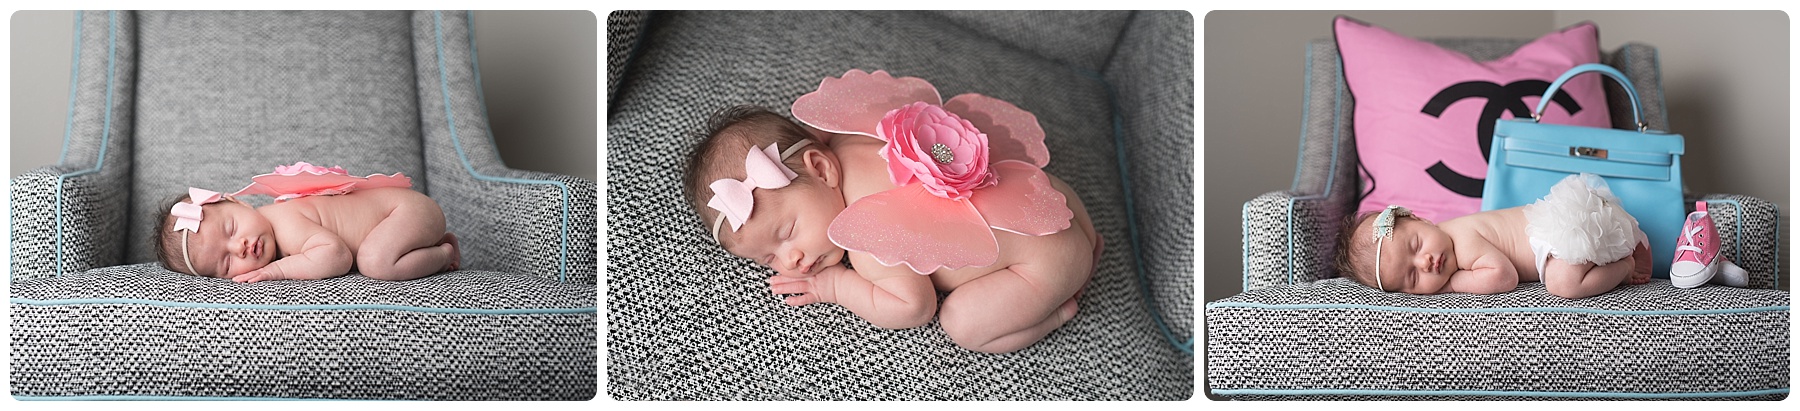 newborn girl with chanel bag and wings